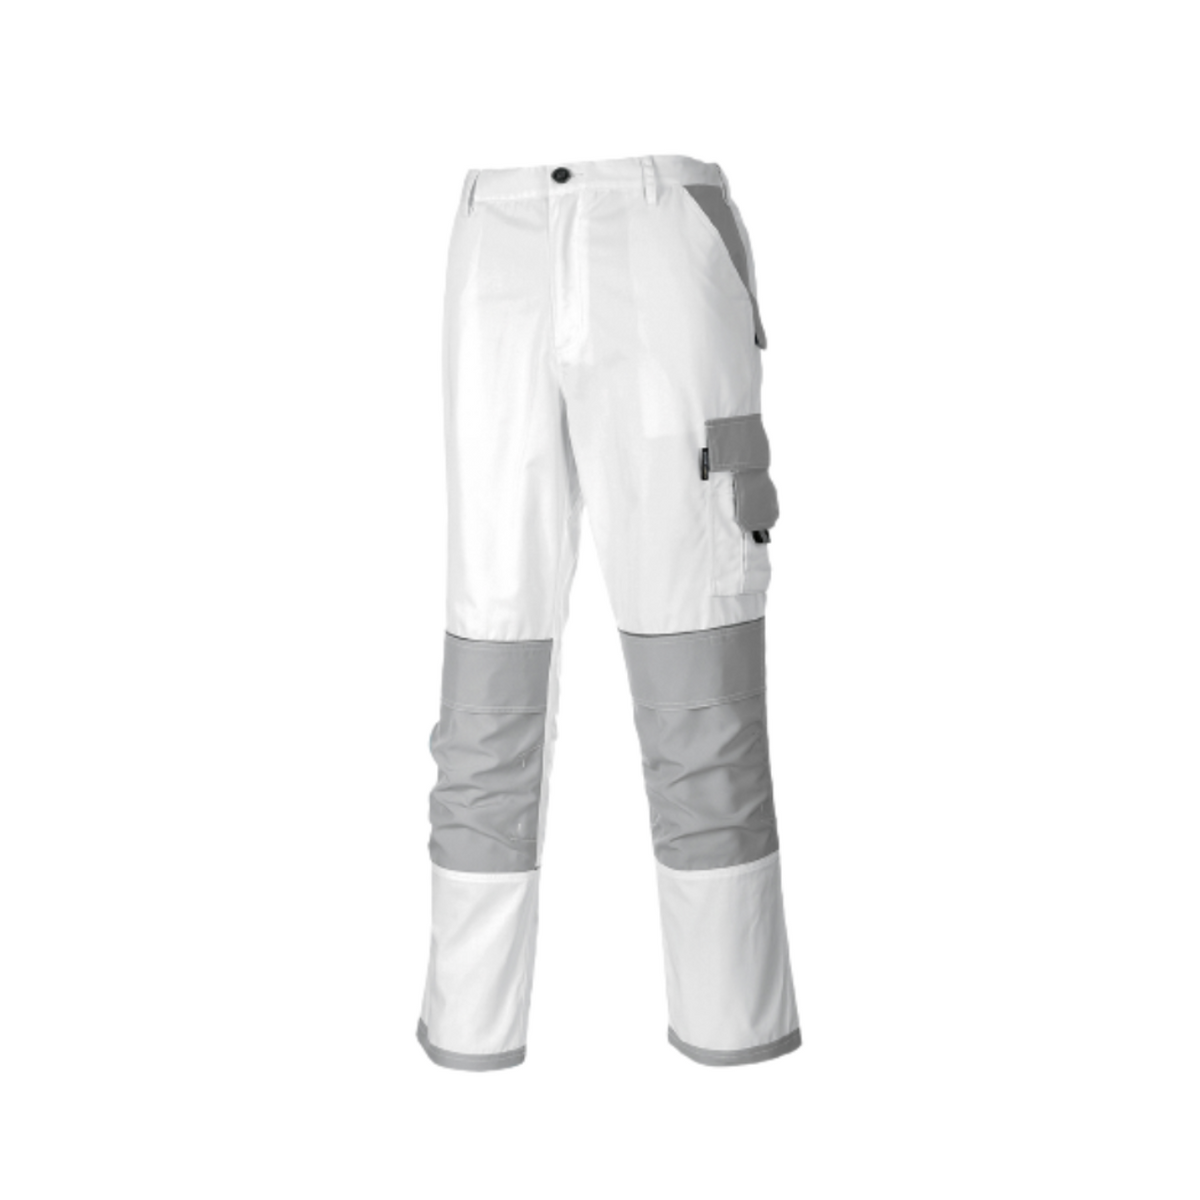 Portwest Painters Pro Trouser Reflective White Taped Work Safety KS54-Collins Clothing Co